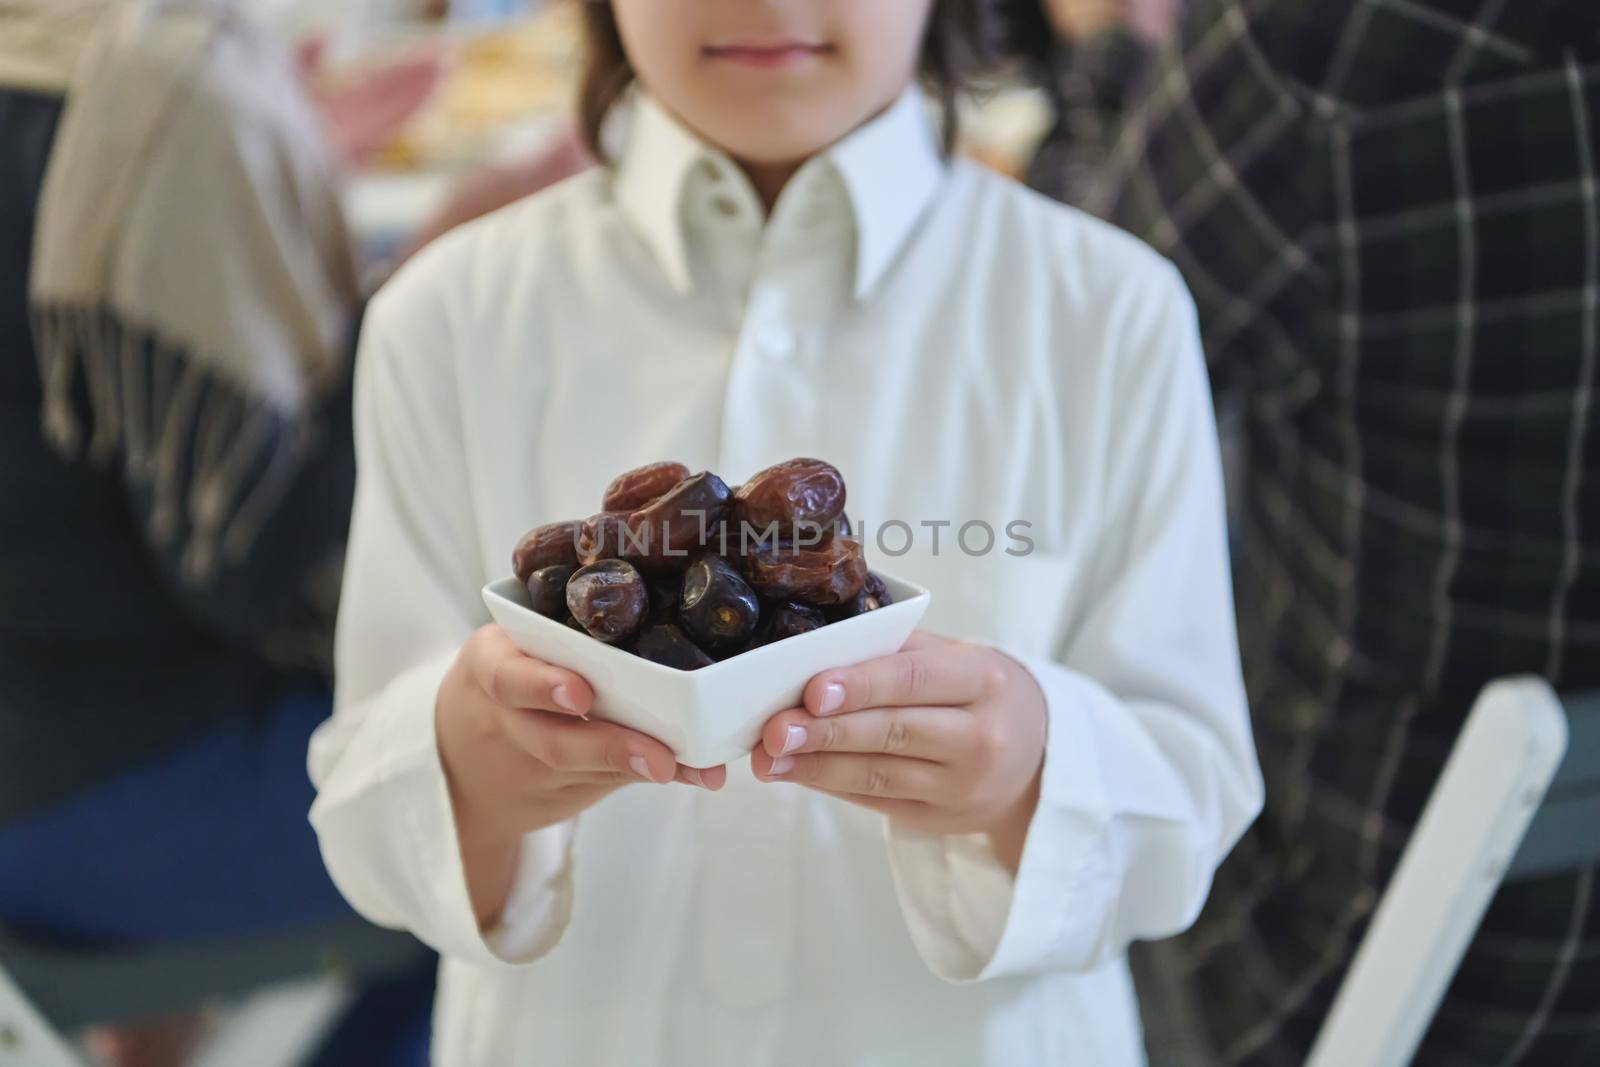 Arabian kid in the traditional clothes during iftar. Portrait of happy young muslim boy holding bowl of dates while rest of the family are eating